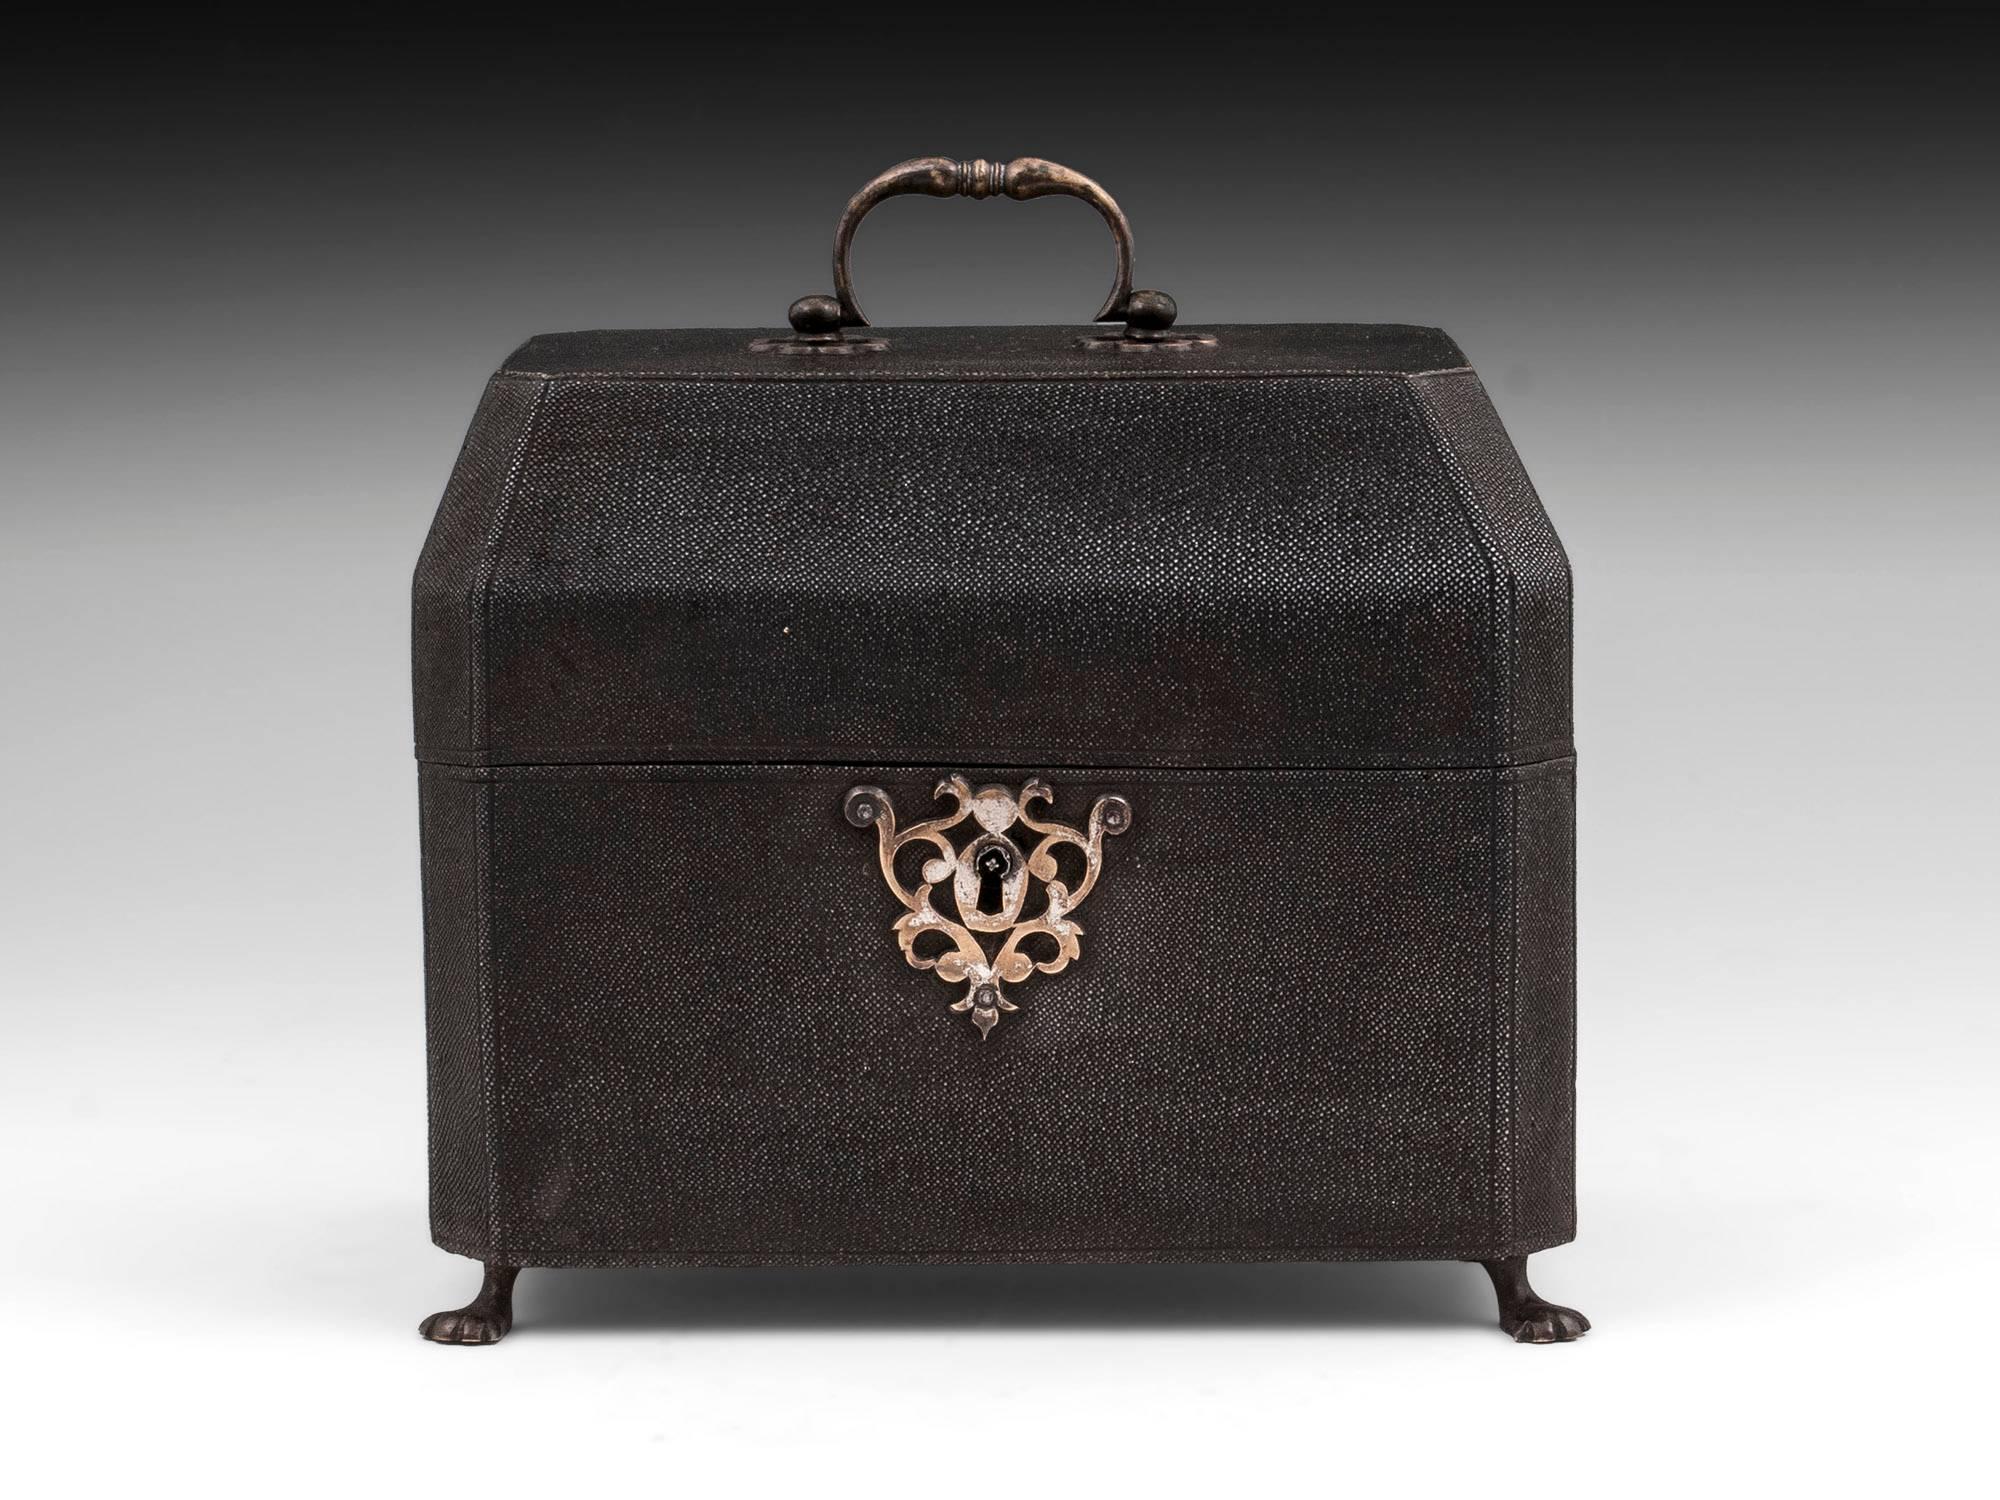 A stunning tea chest incorporating a pair of George III silver tea caddies by London silversmiths Smith & Sharp 1762, housed in a green velvet-lined, brass-mounted shagreen case. The silver tea caddies, of an elegant bombe´ shape, have embossed